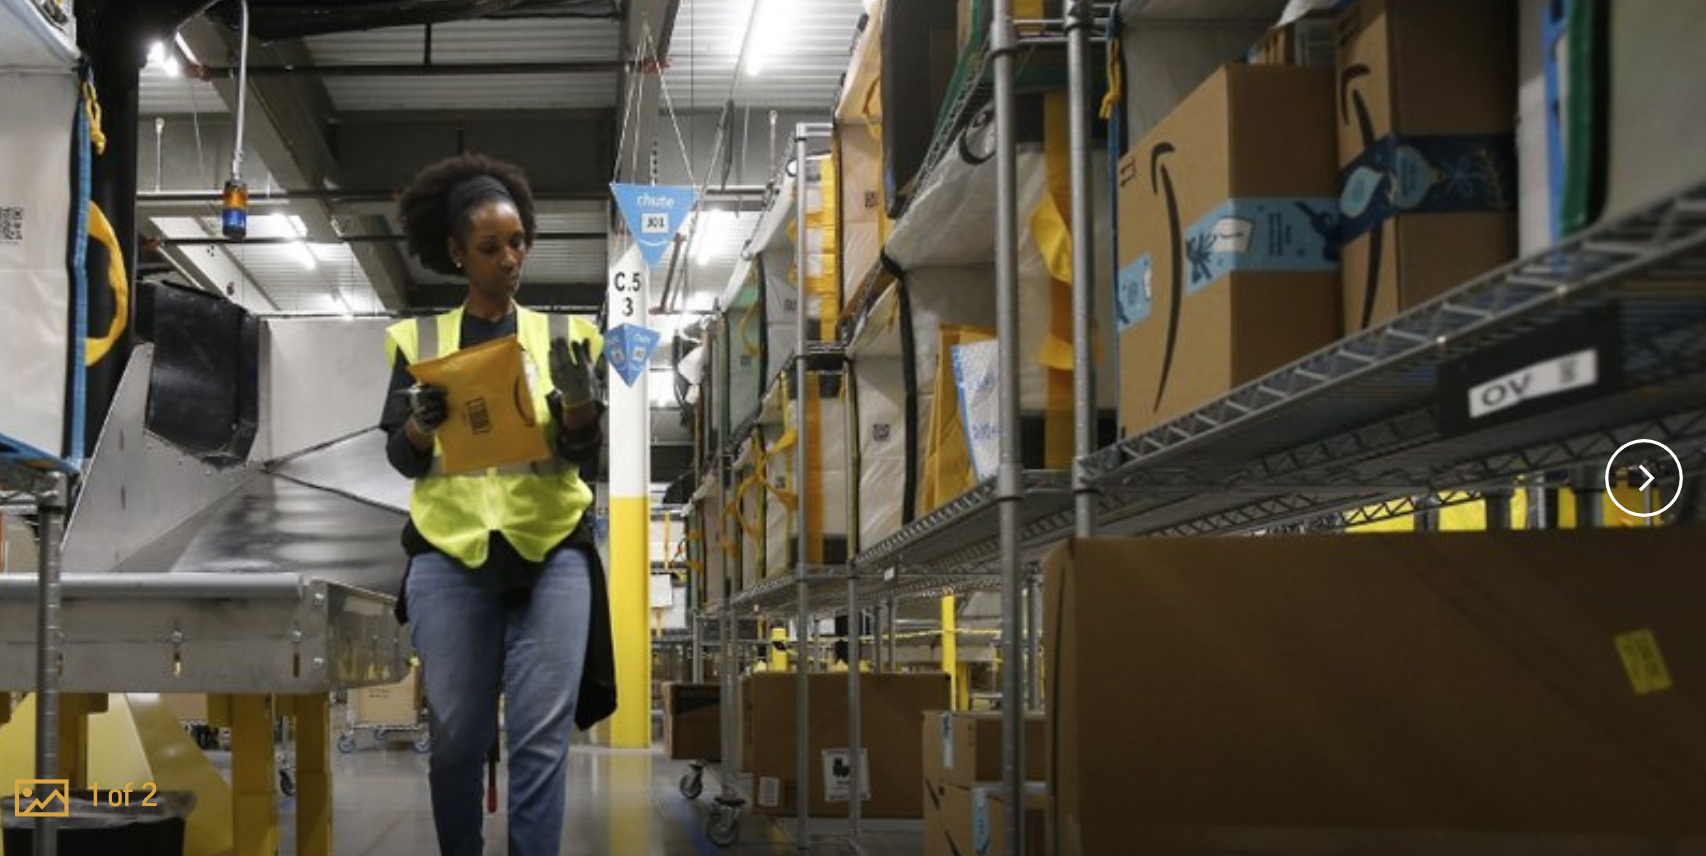 Amazon needs to hire more workers to keep up with surge in orders